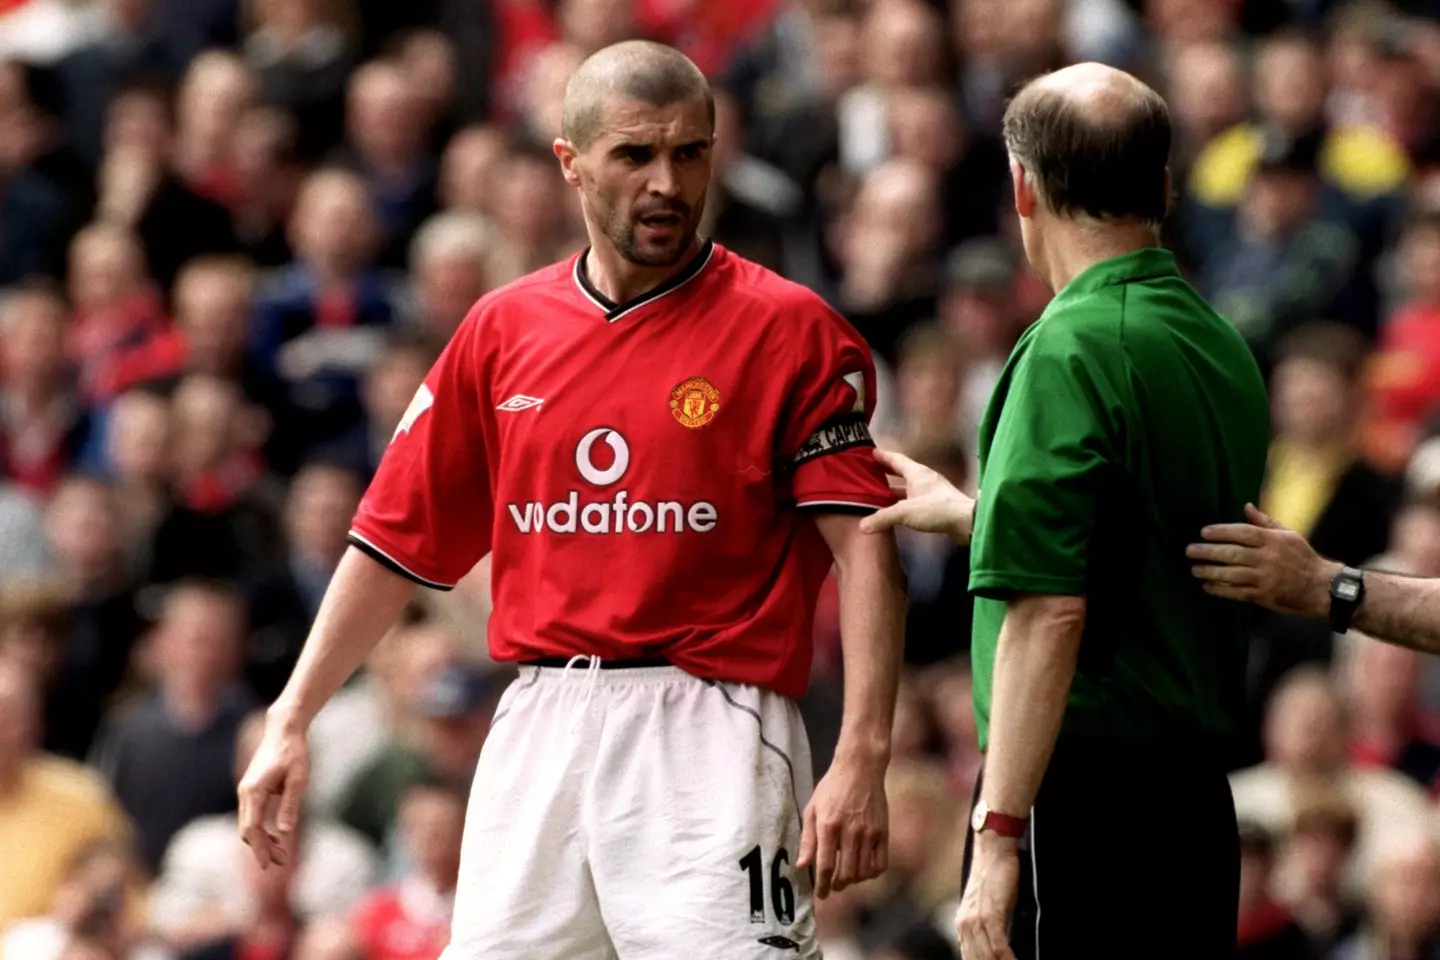 Roy Keane was sent off for his infamous challenge on Alf-Inge Haaland. (PA)